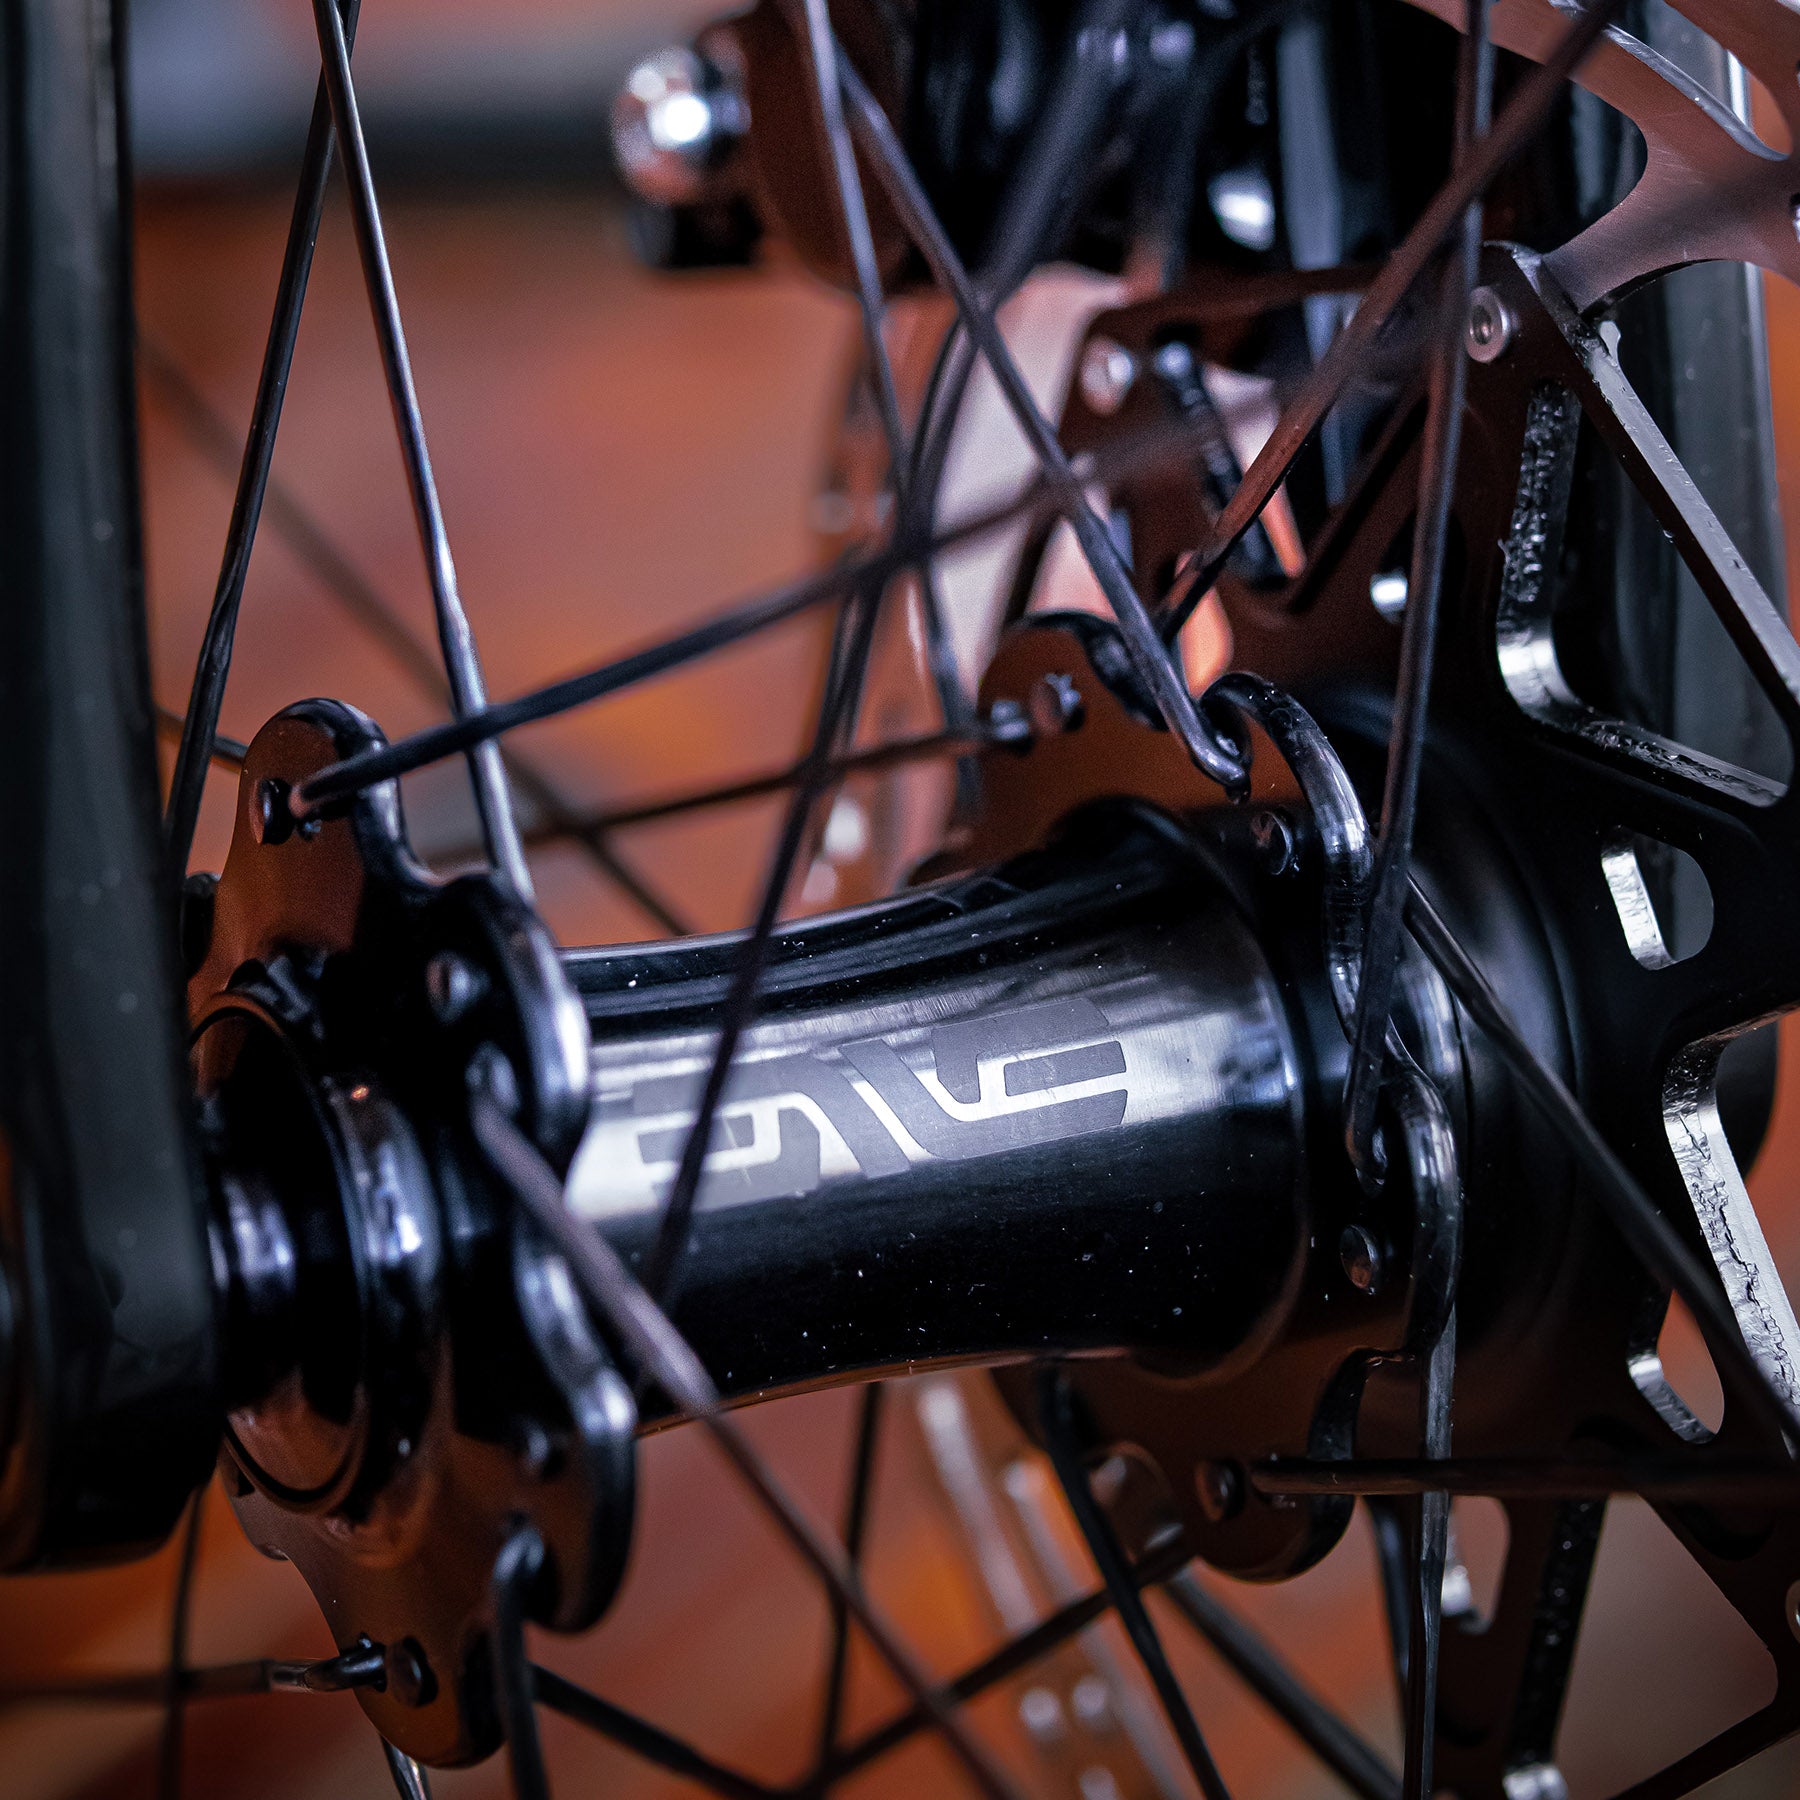 Image features the front wheel shaft and spokes of the Chapter 2 TOA bike